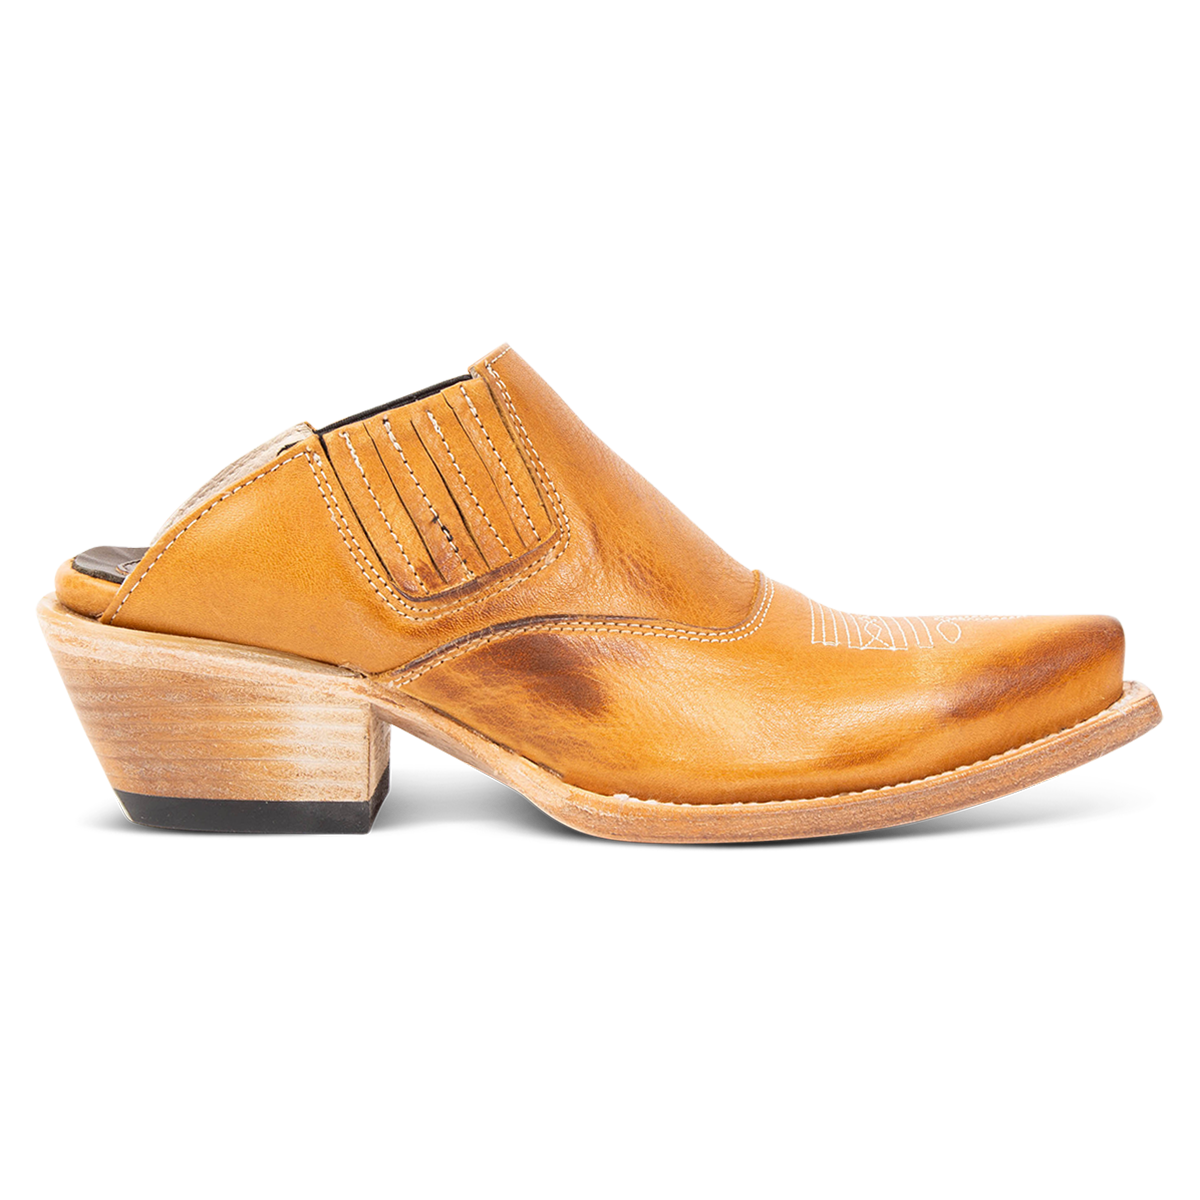 FREEBIRD women's Wentworth wheat western mule featuring elastic gore, stitch detailing, open back, and snip toe